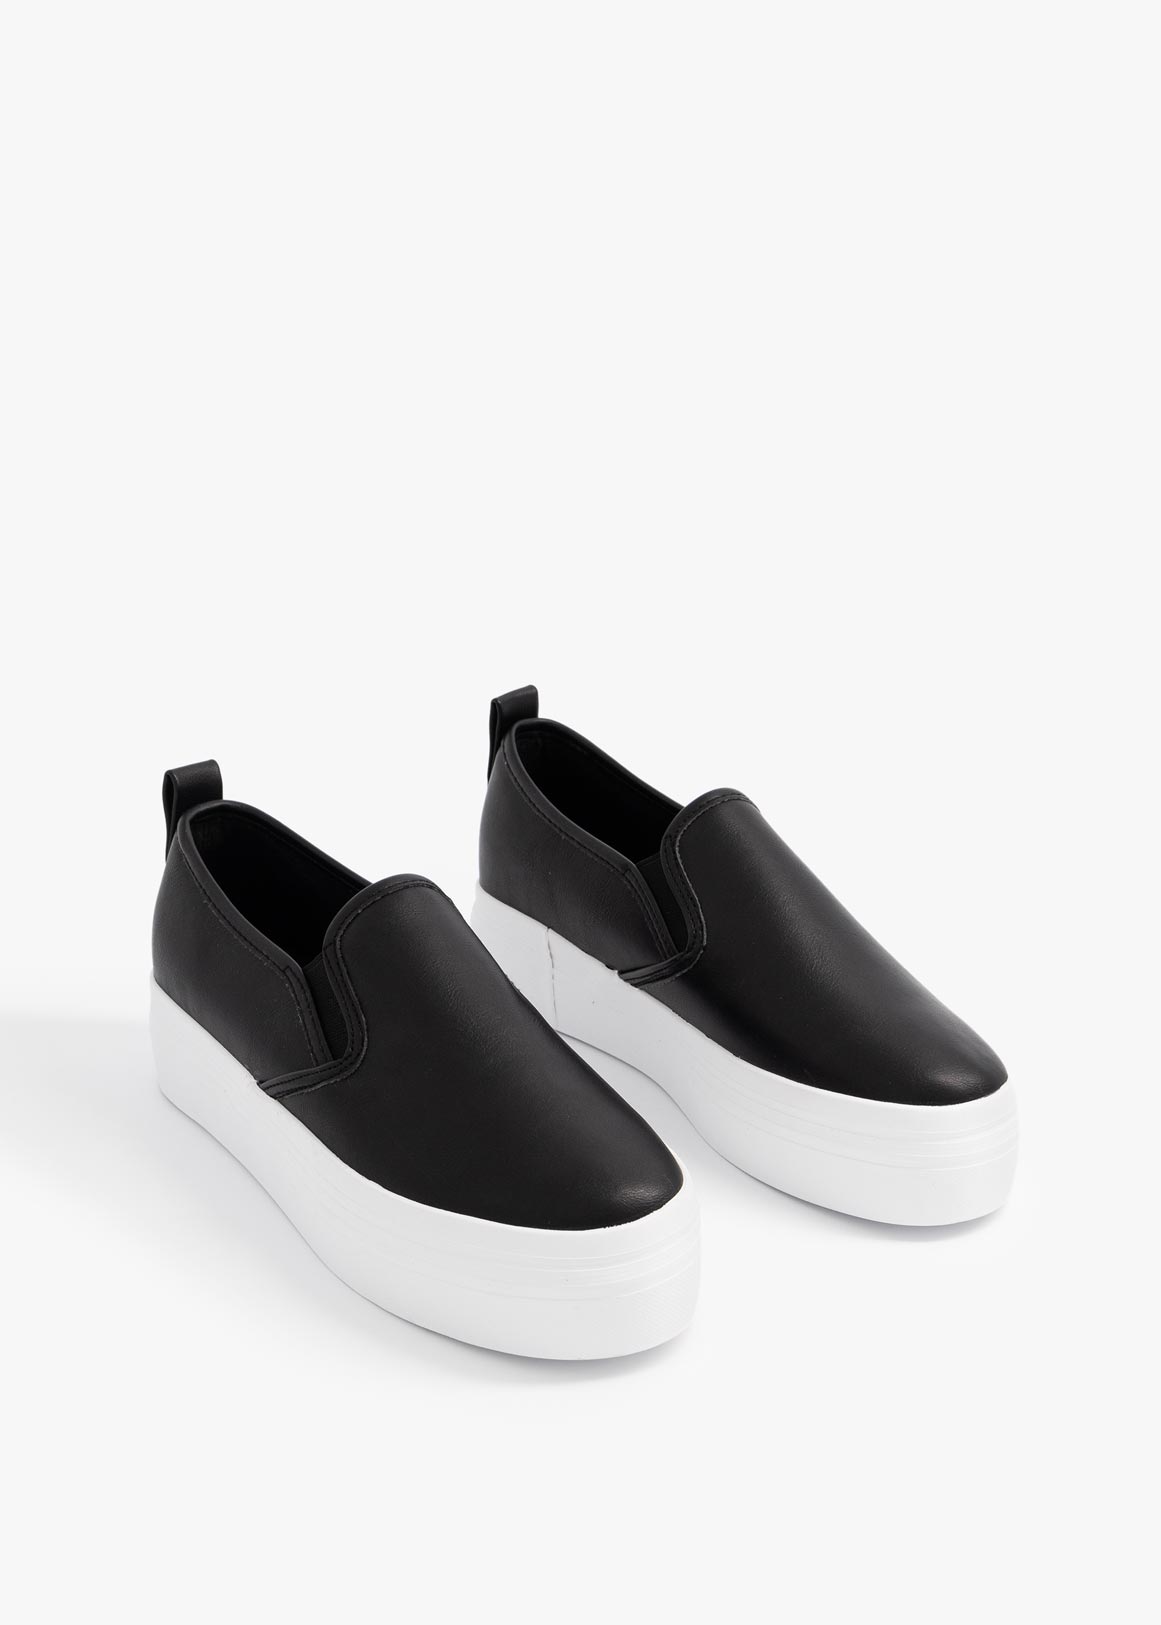 Woolworths Sneakers For Ladies | vlr.eng.br